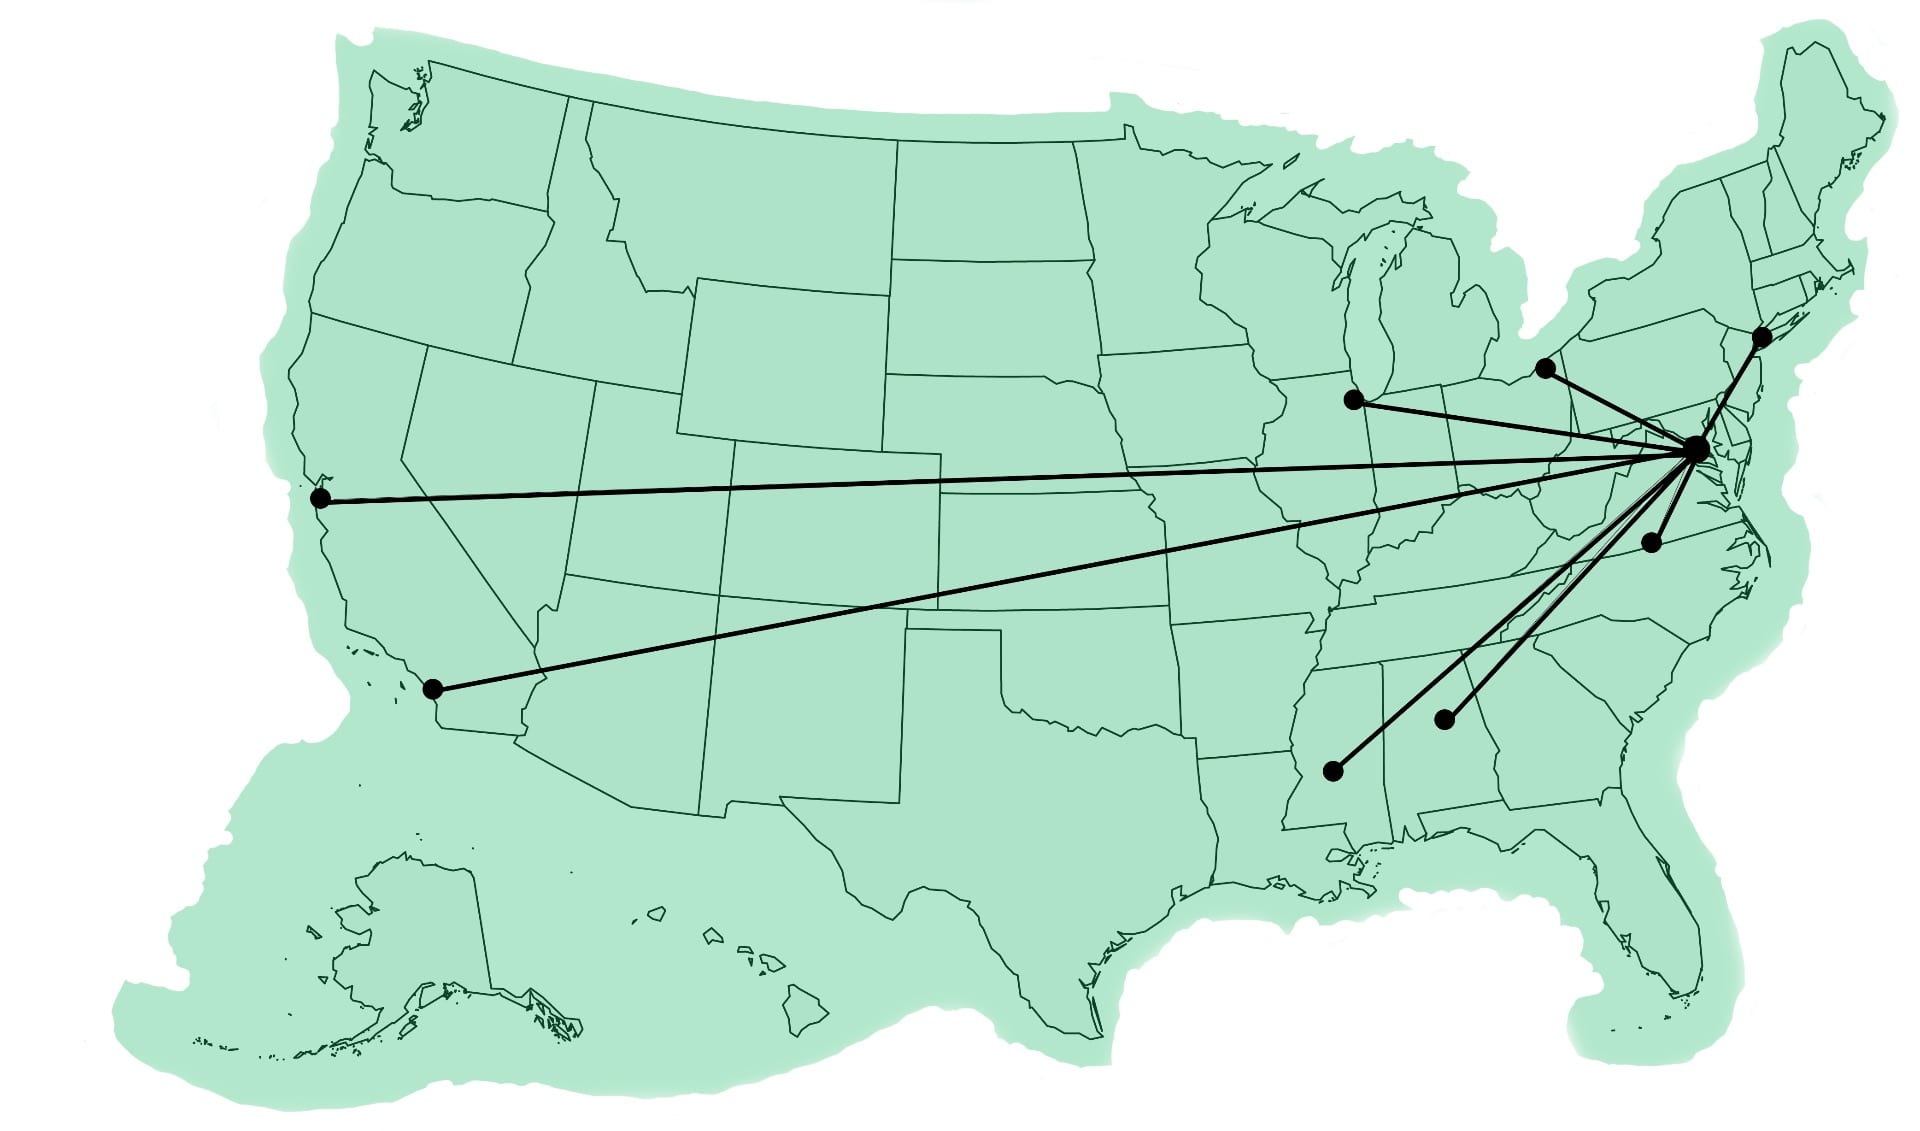 Map of US with dots at San Francisco, Los Angeles, Birmingham (AL), Jackson (MS), Chicago, Cleveland, Danville (VA), New York, and Washington, DC, with lines connecting each city to DC.